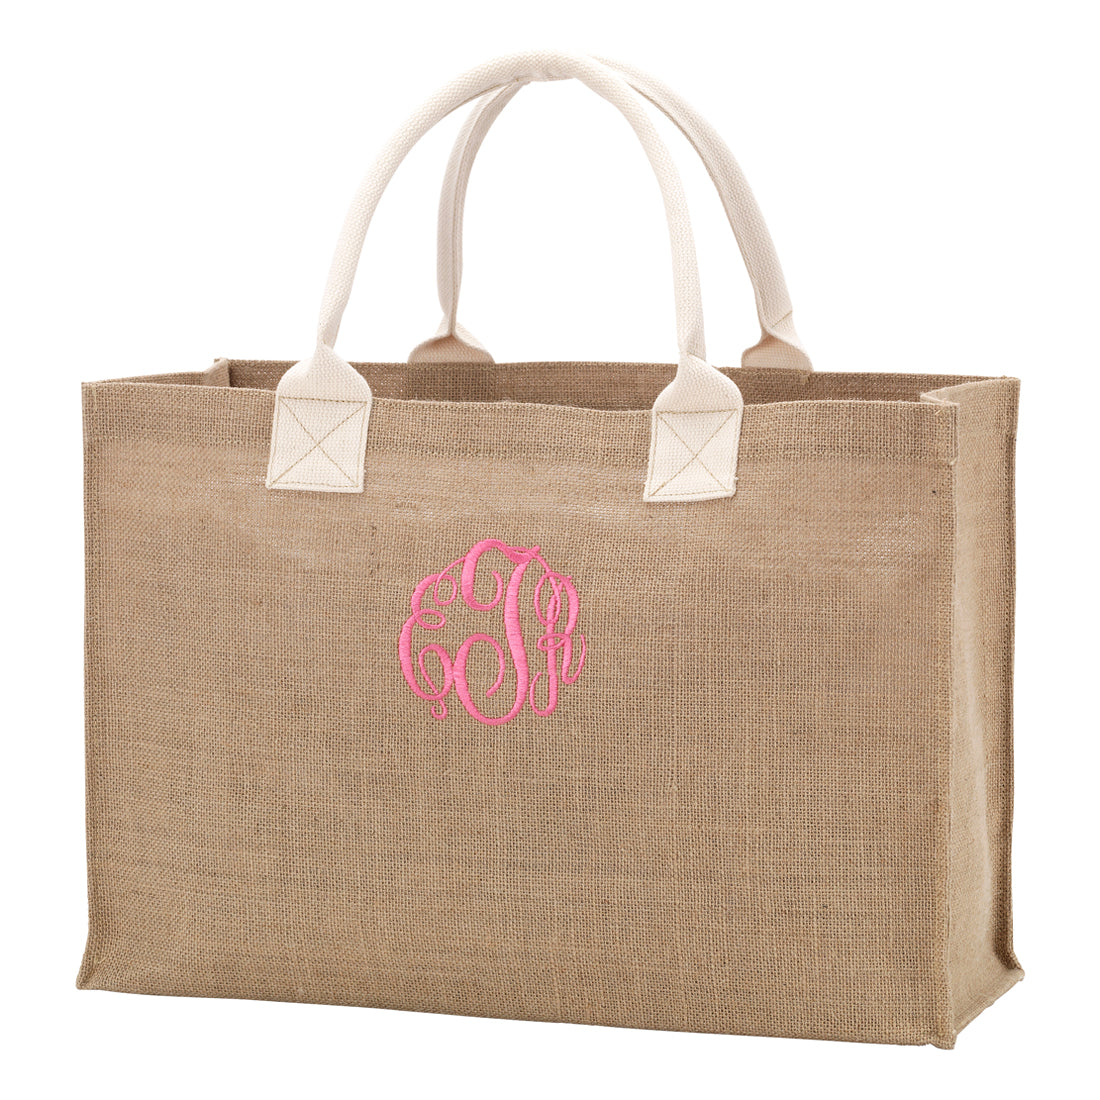 Personalized Burlap Tote Bag | Preppy Monogrammed Gifts